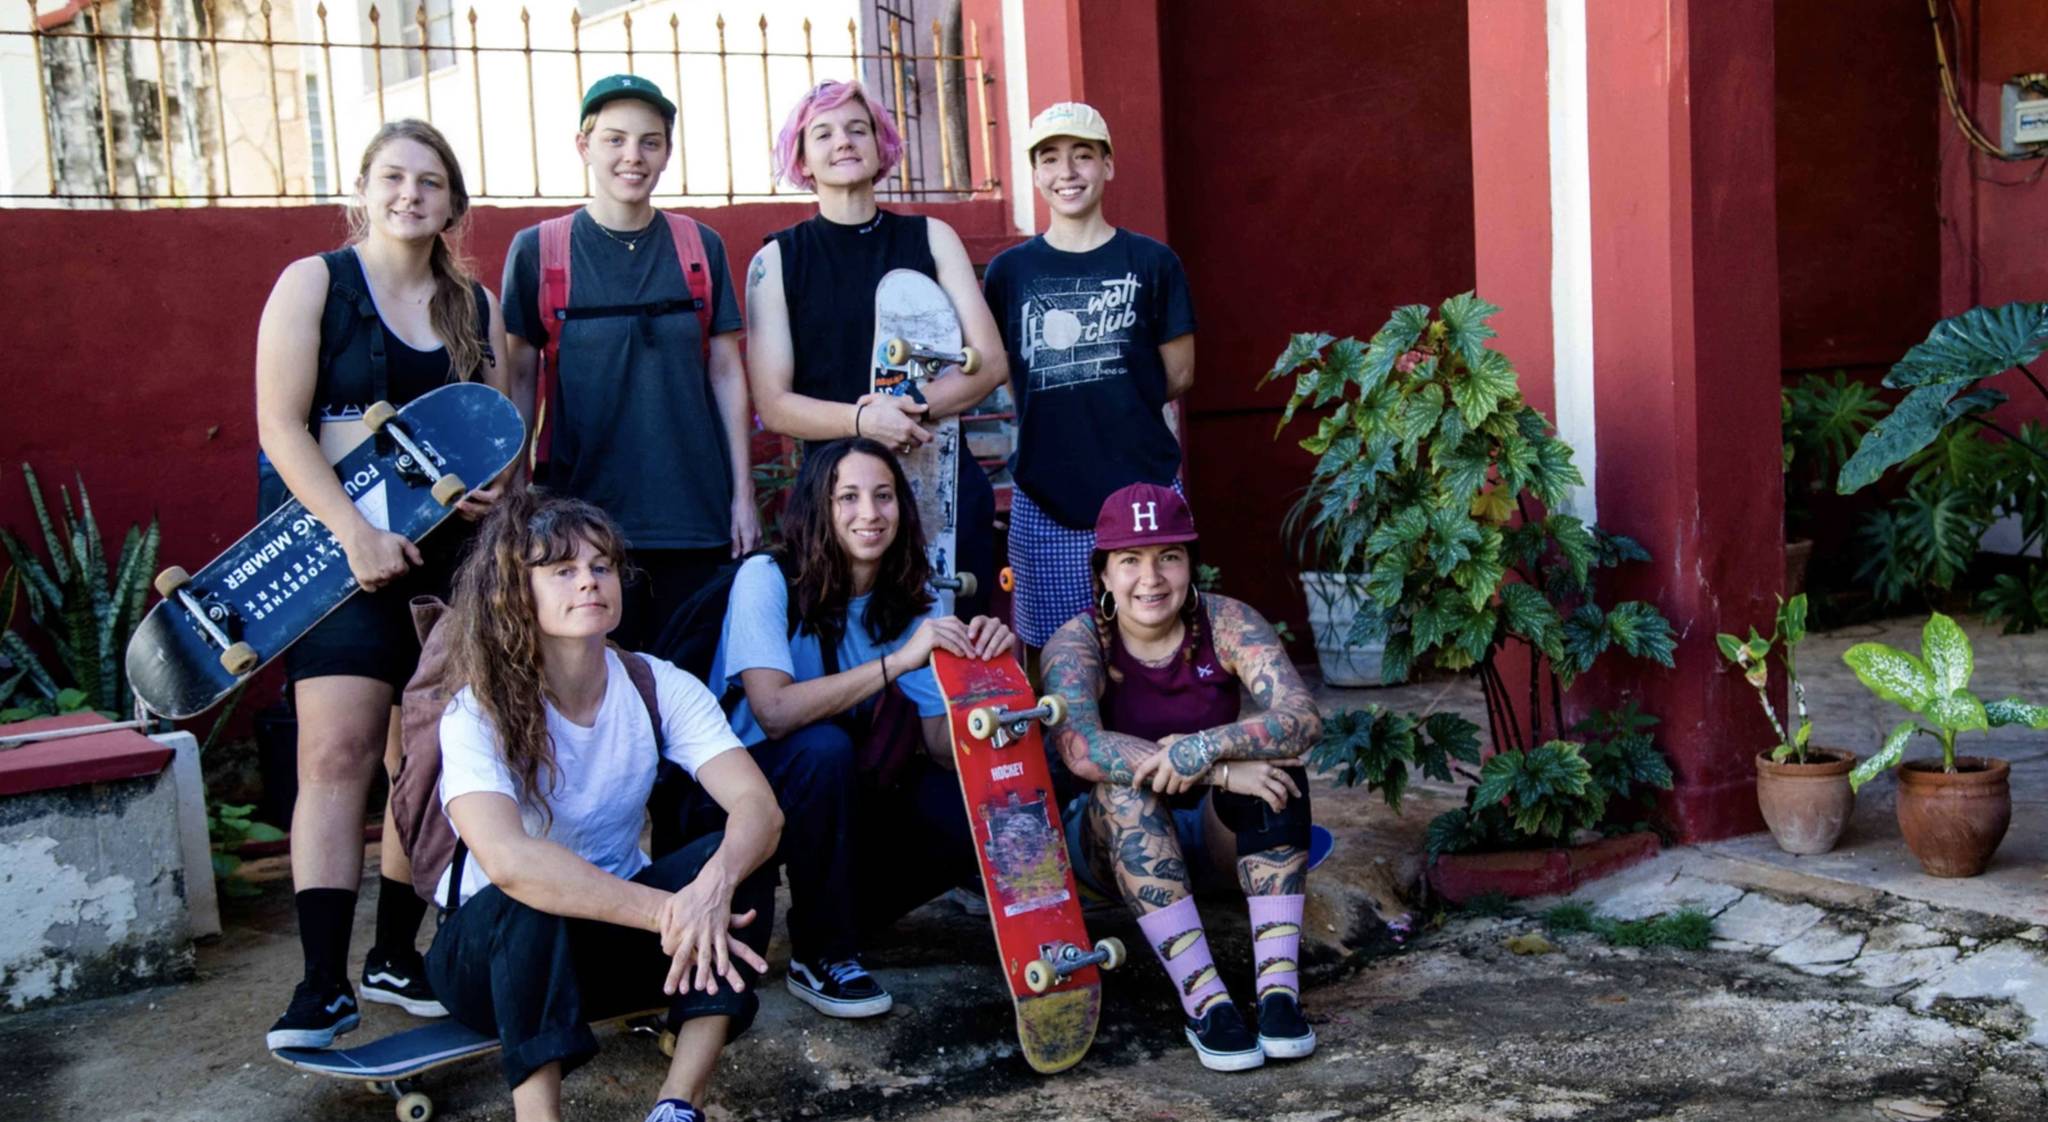 The Skate Witches: connecting the skate scene